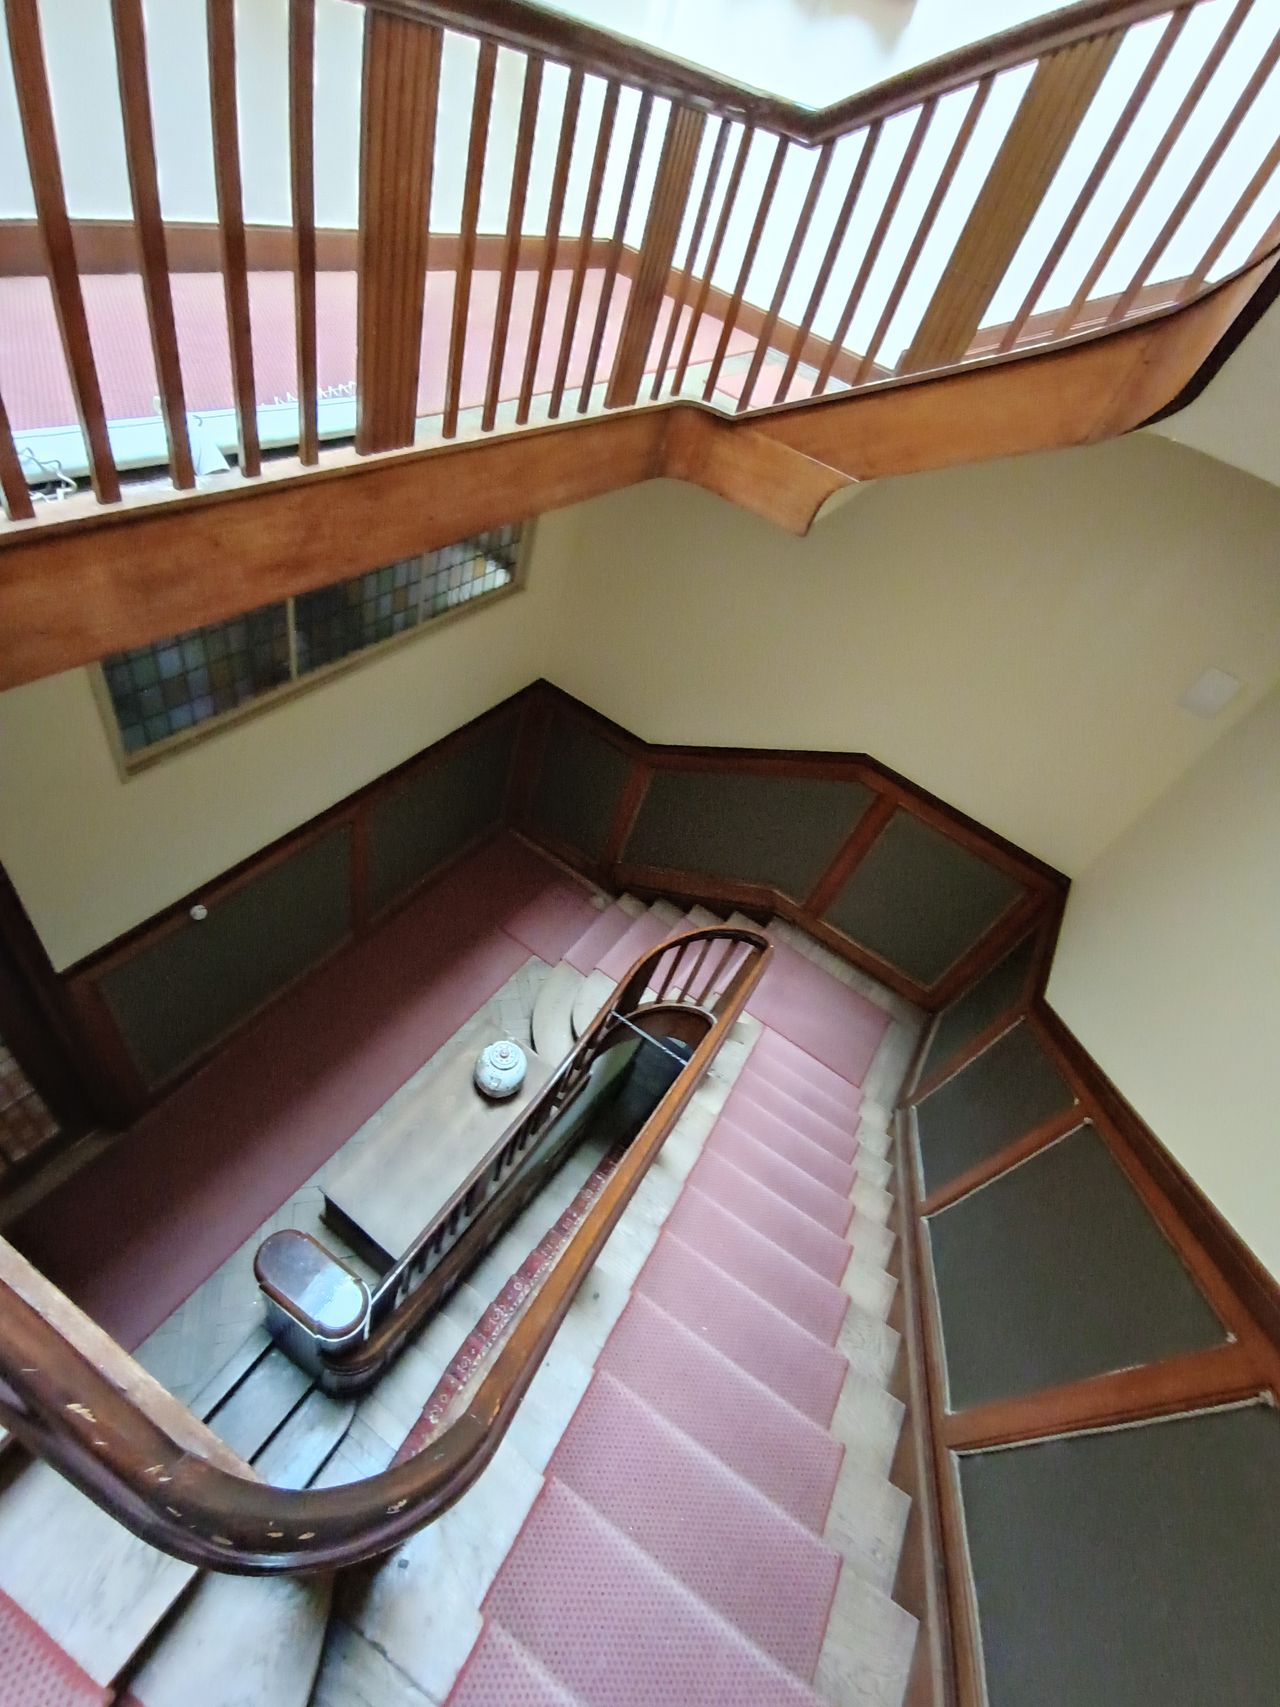 Exclusively furnished loft apartment in an old building in a central location